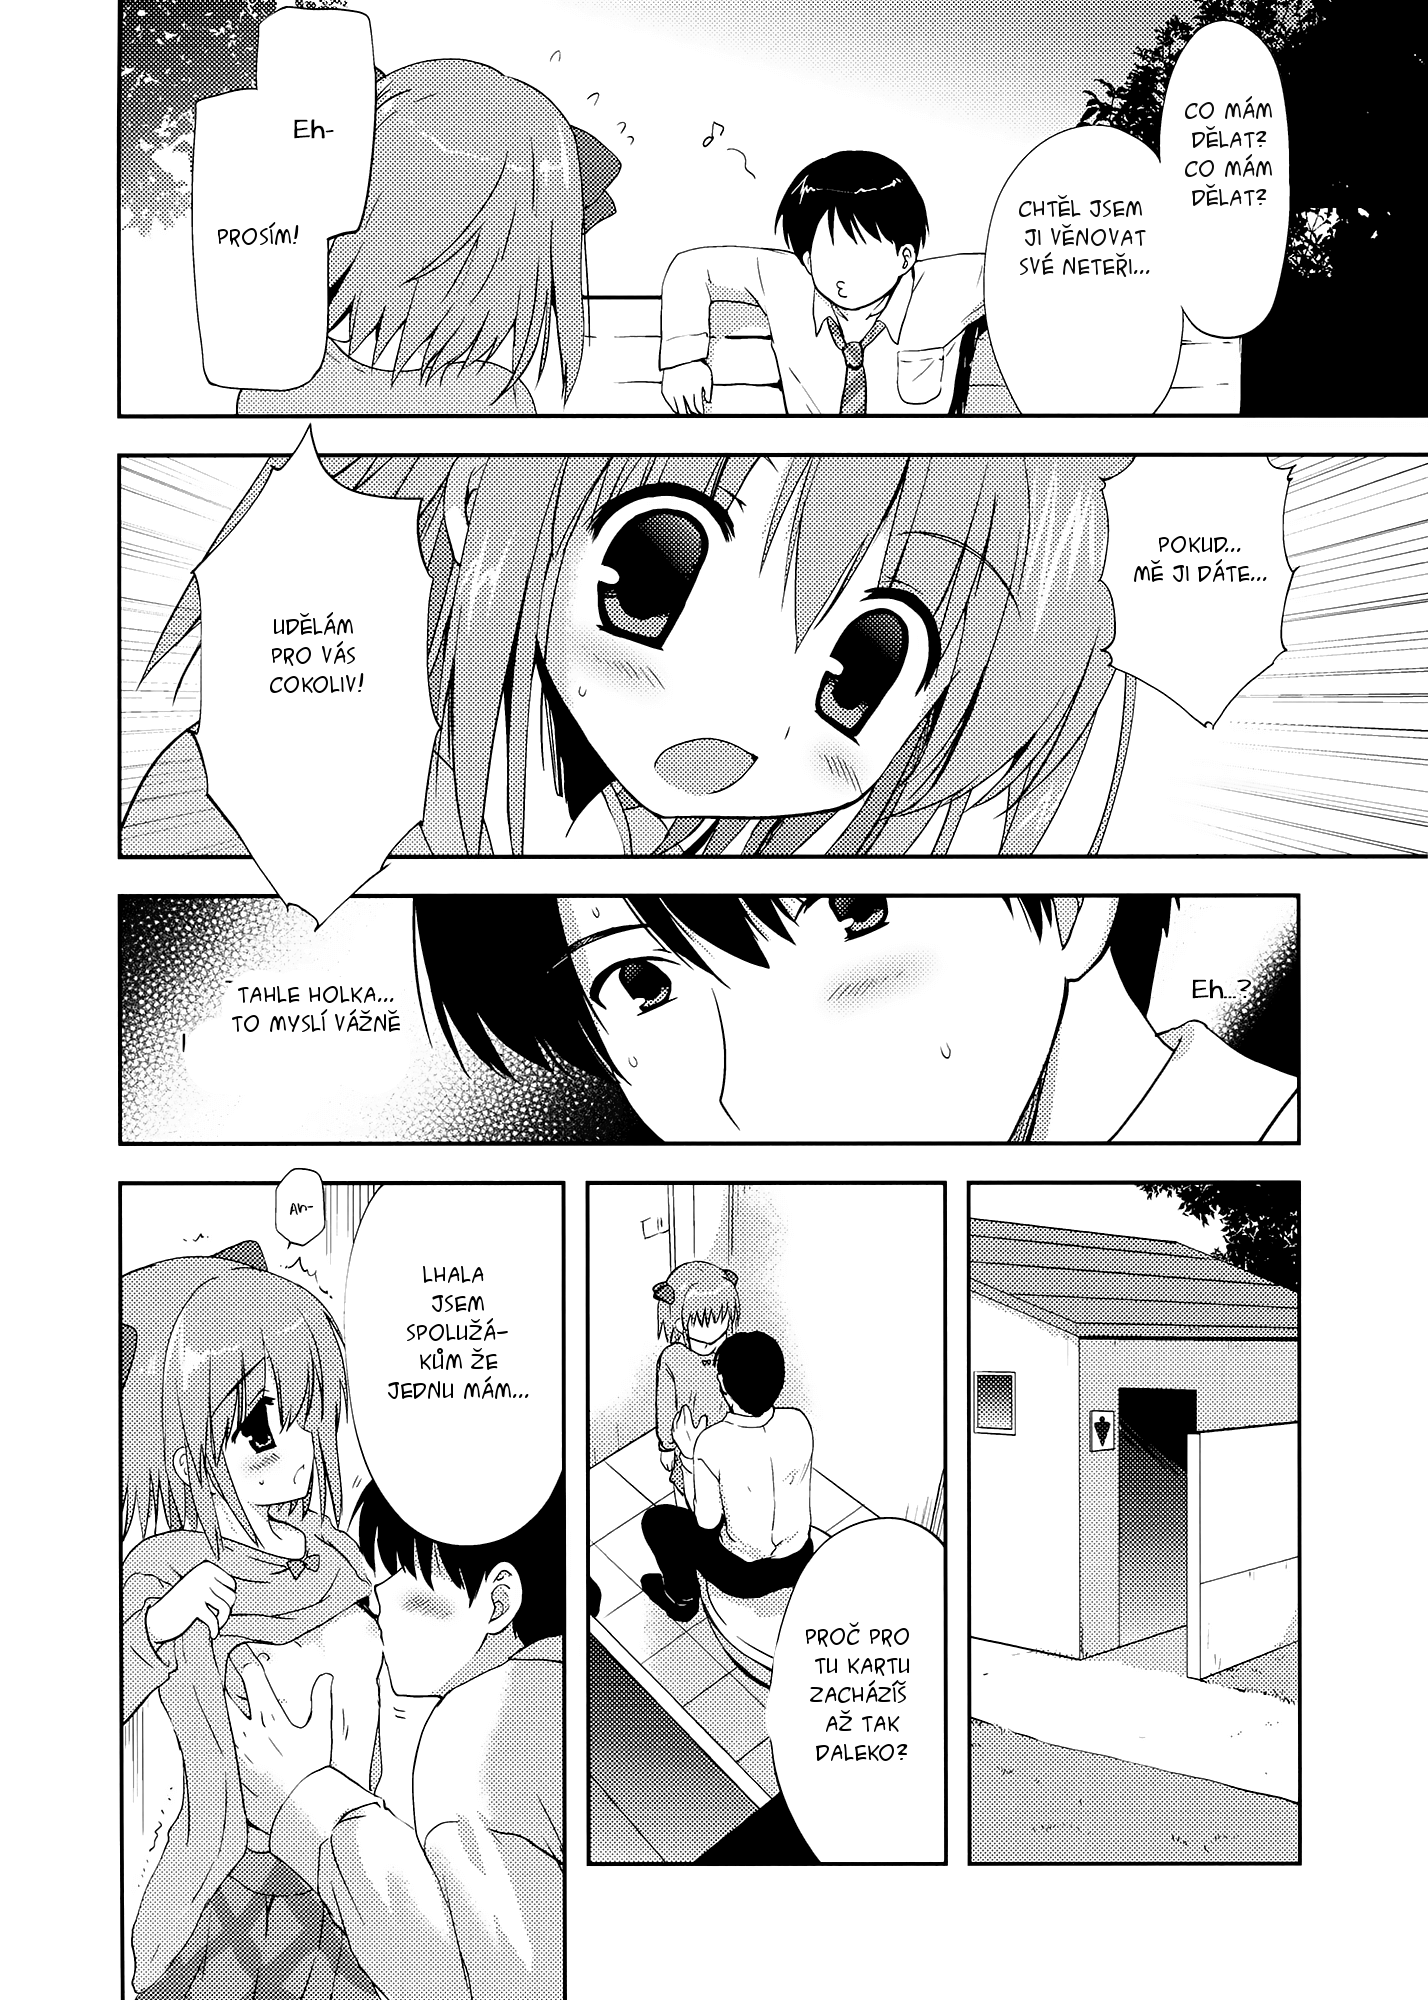 Doki The Story Of How I Did It With An Elementary Schooler For Only 30 Yen Original Page 02